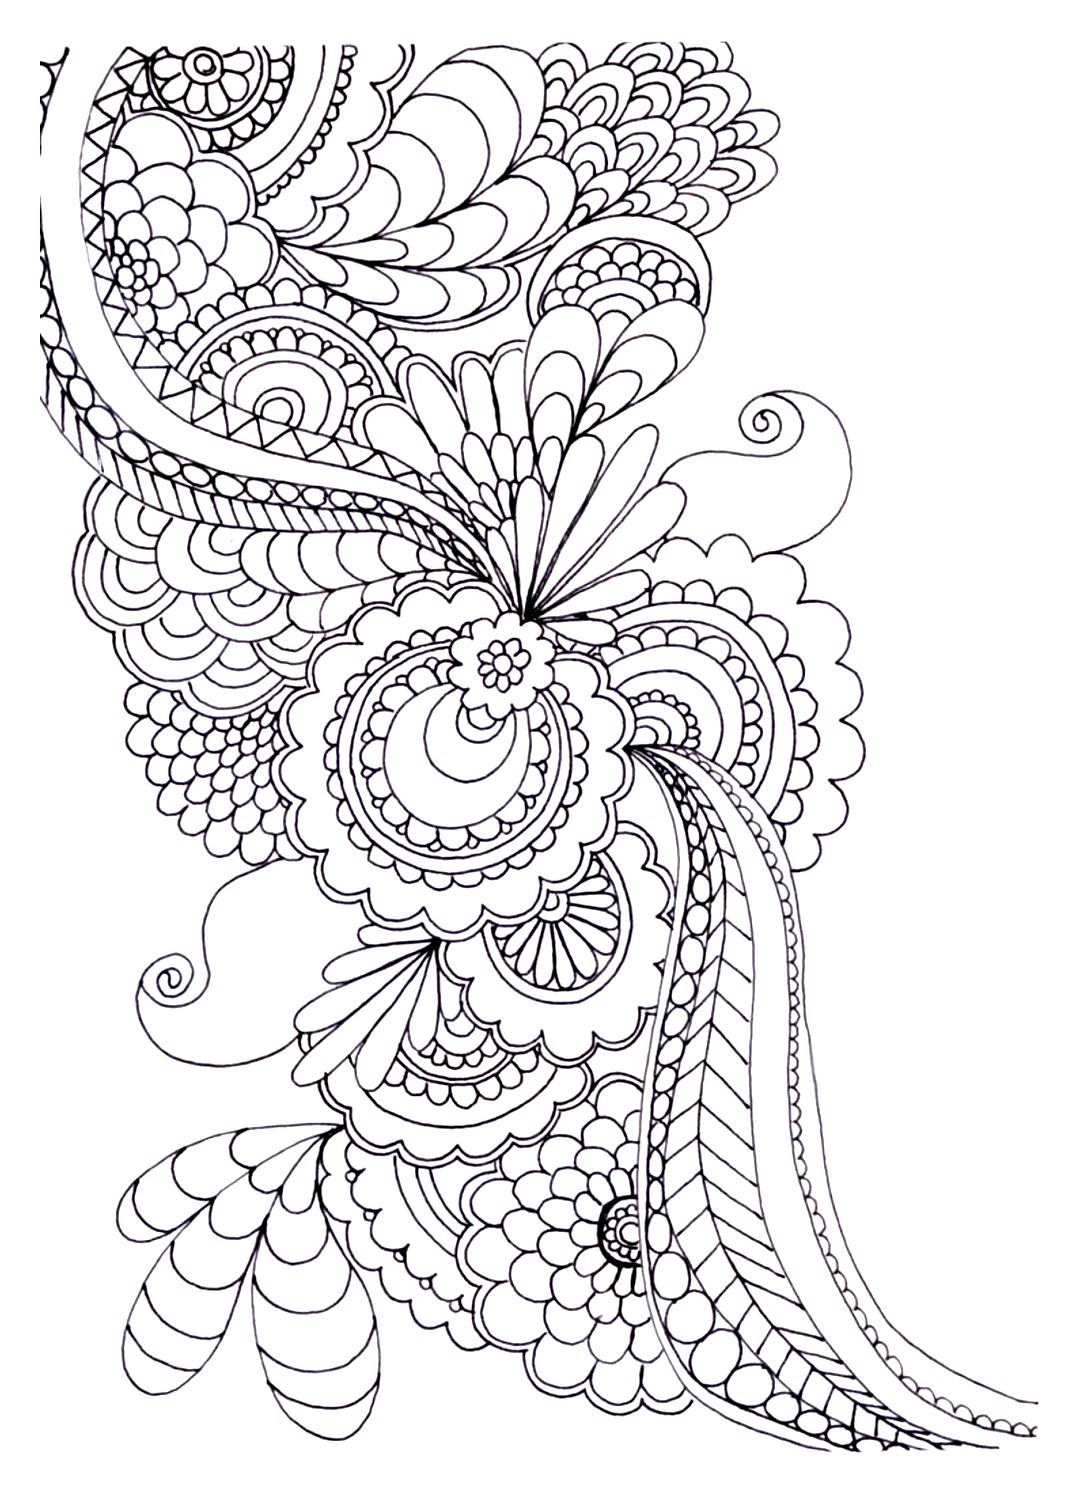 Zen anti stress to print drawing flowers Anti stress Adult Coloring Pages